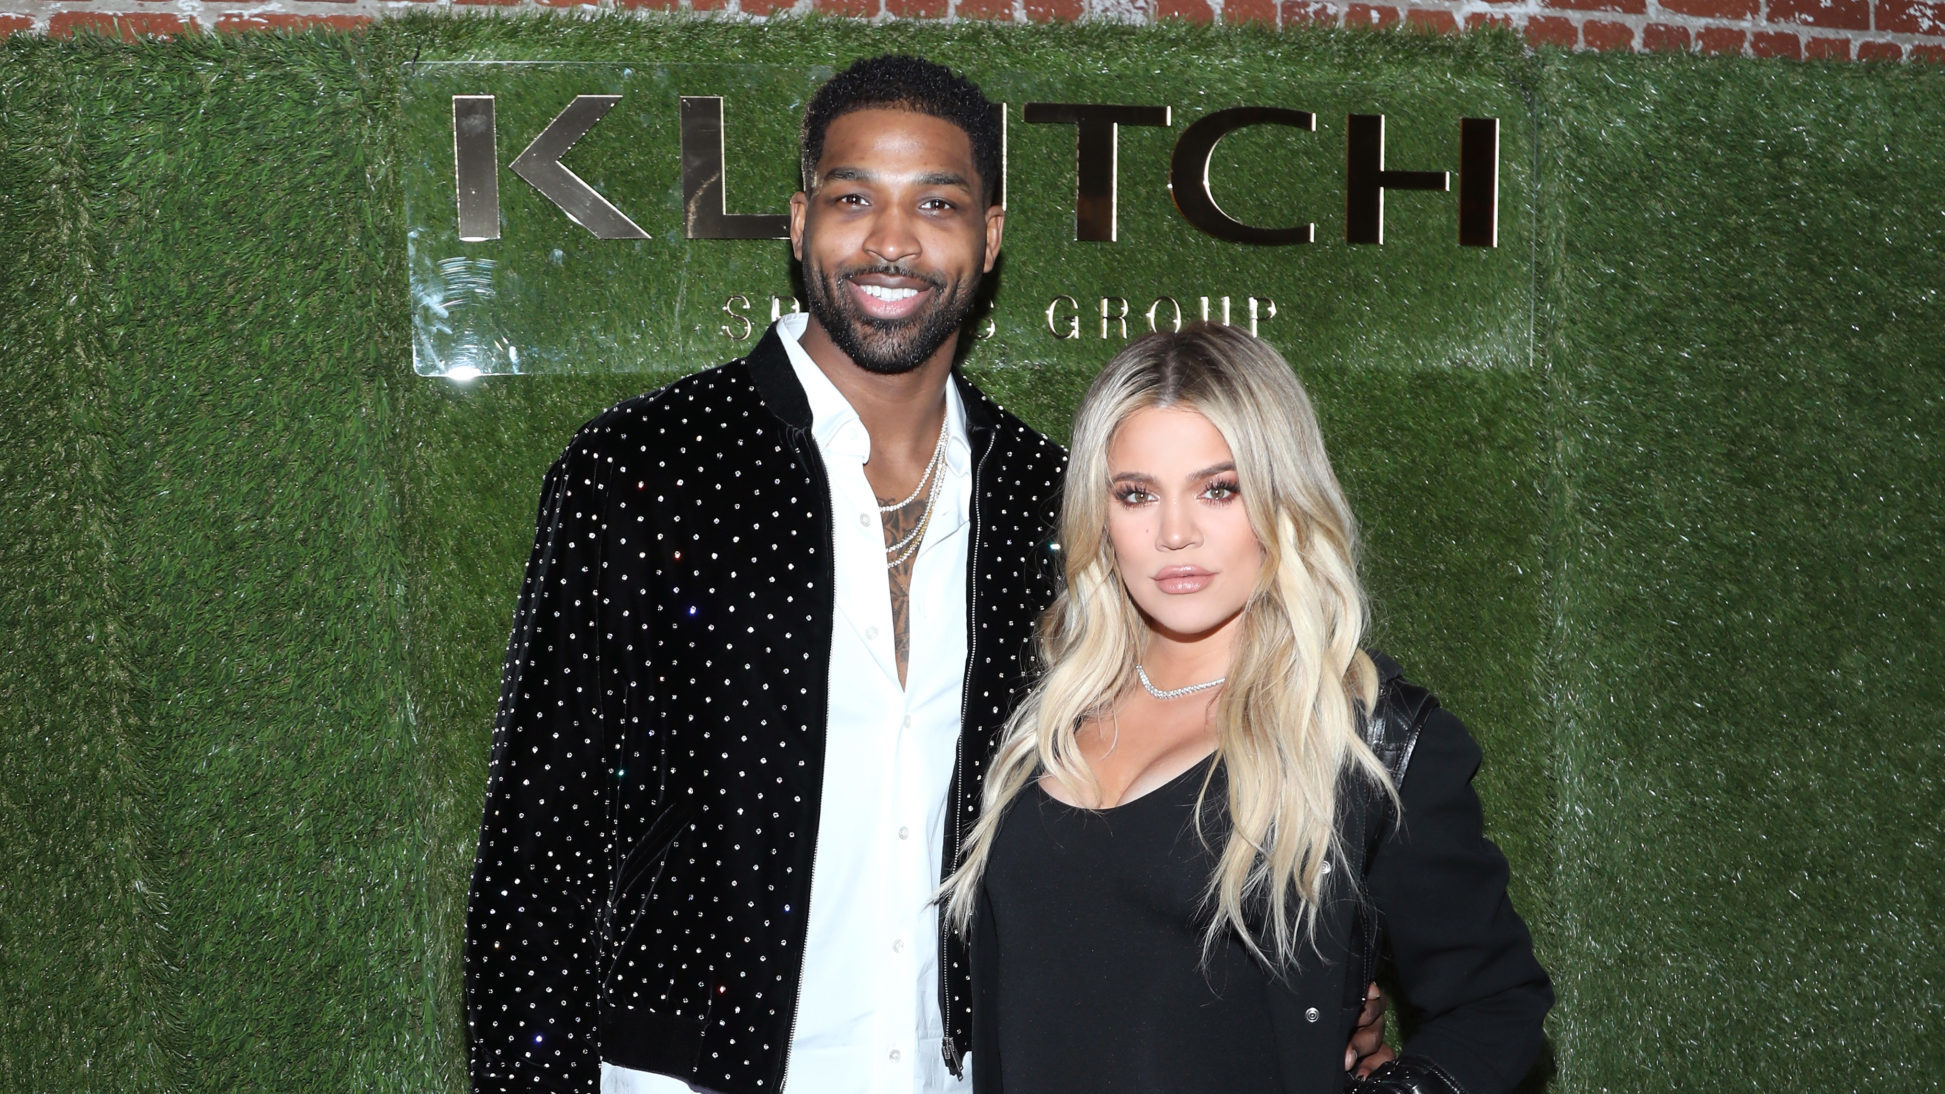 She was planning a second child, but a month later she was betrayed.  Khloe Kardashian is going to be a mom soon